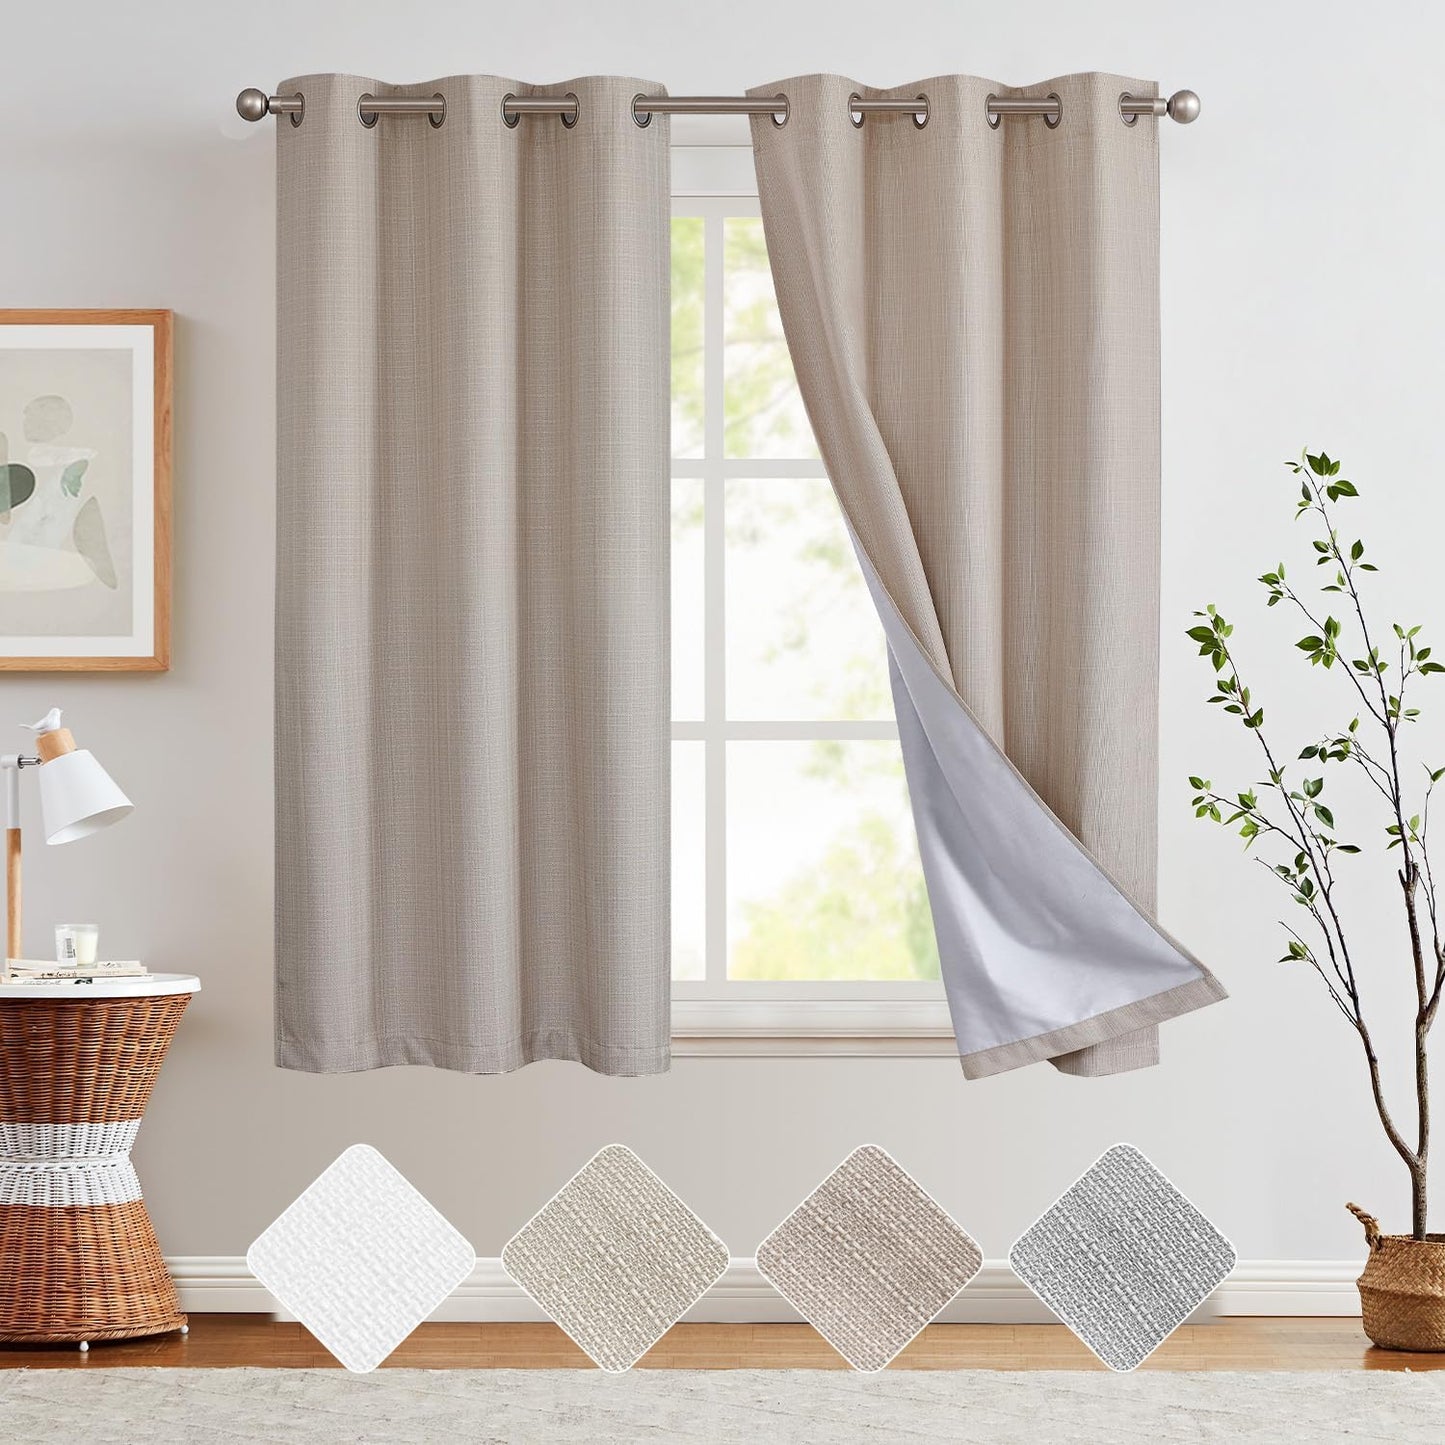 COLLACT White Linen Textured Curtains 84 Inch Length 2 Panels for Living Room Casual Weave Light Filtering Semi Sheer Curtains & Drapes for Bedroom Grommet Top Window Treatments, W38 X L84, White  COLLACT Blackout | Heathered Taupe W38 X L63 